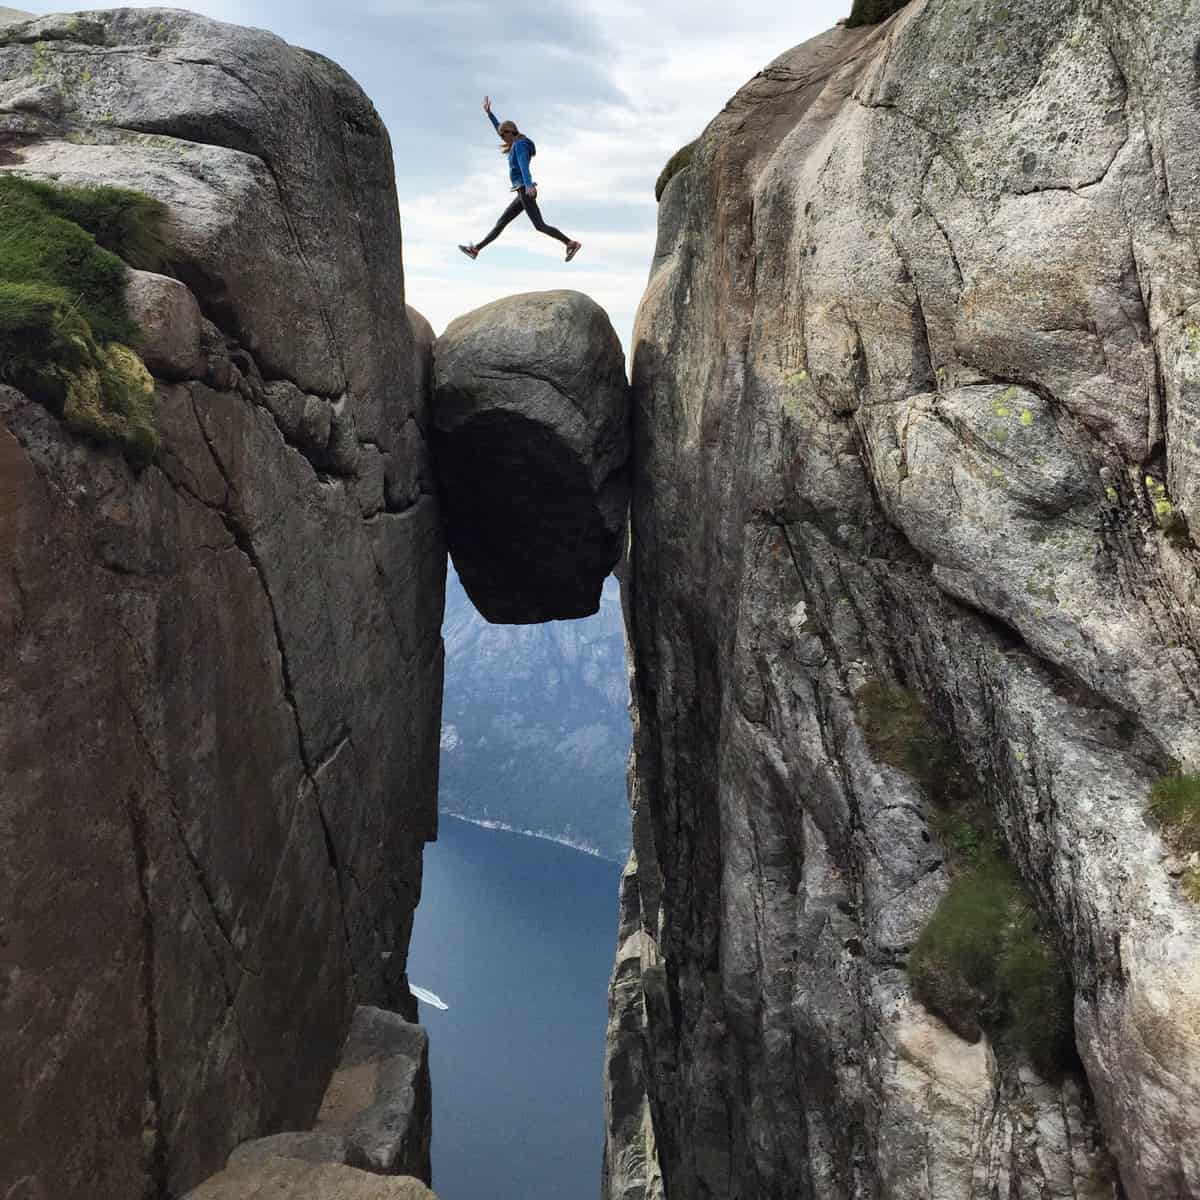 The hike to Kjerag climbs 570 meters and takes around 5 hours.